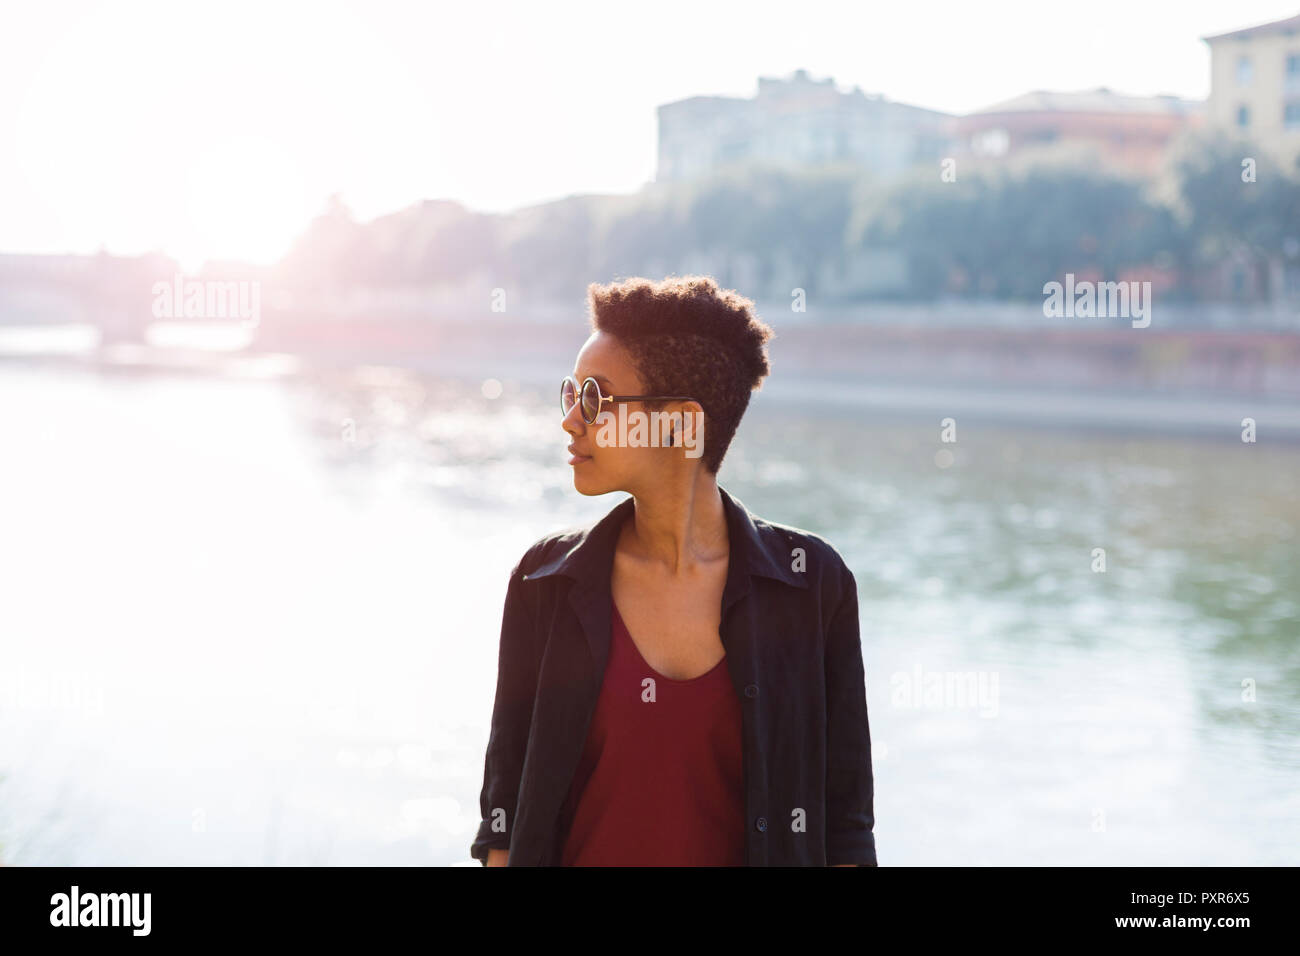 Italy, Verona, young woman in front of Adige River Stock Photo